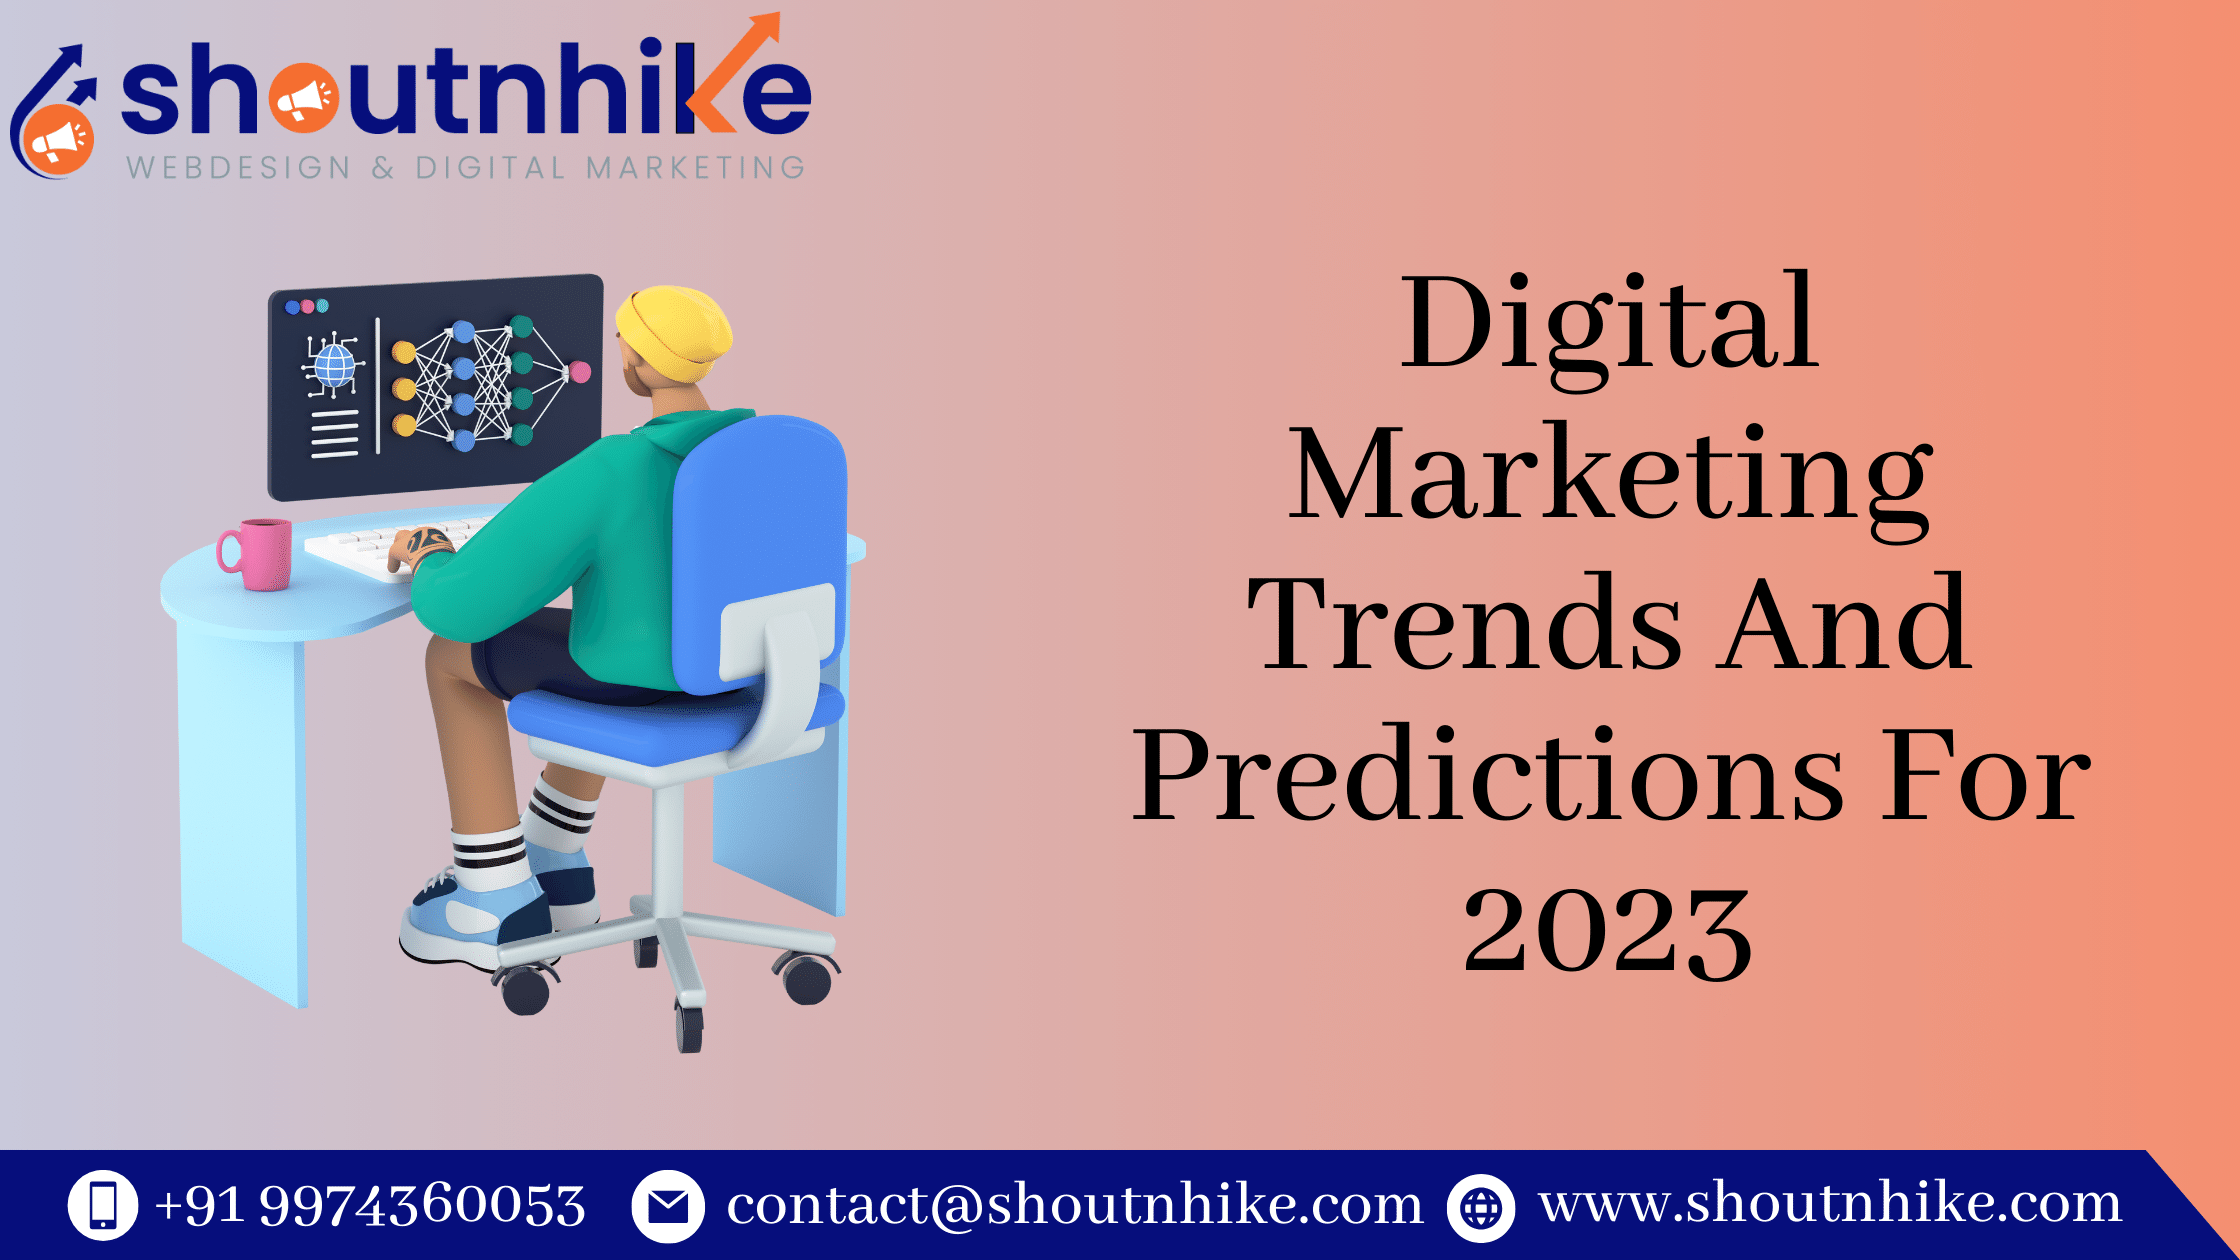 Digital Marketing Trends And Predictions For 2023